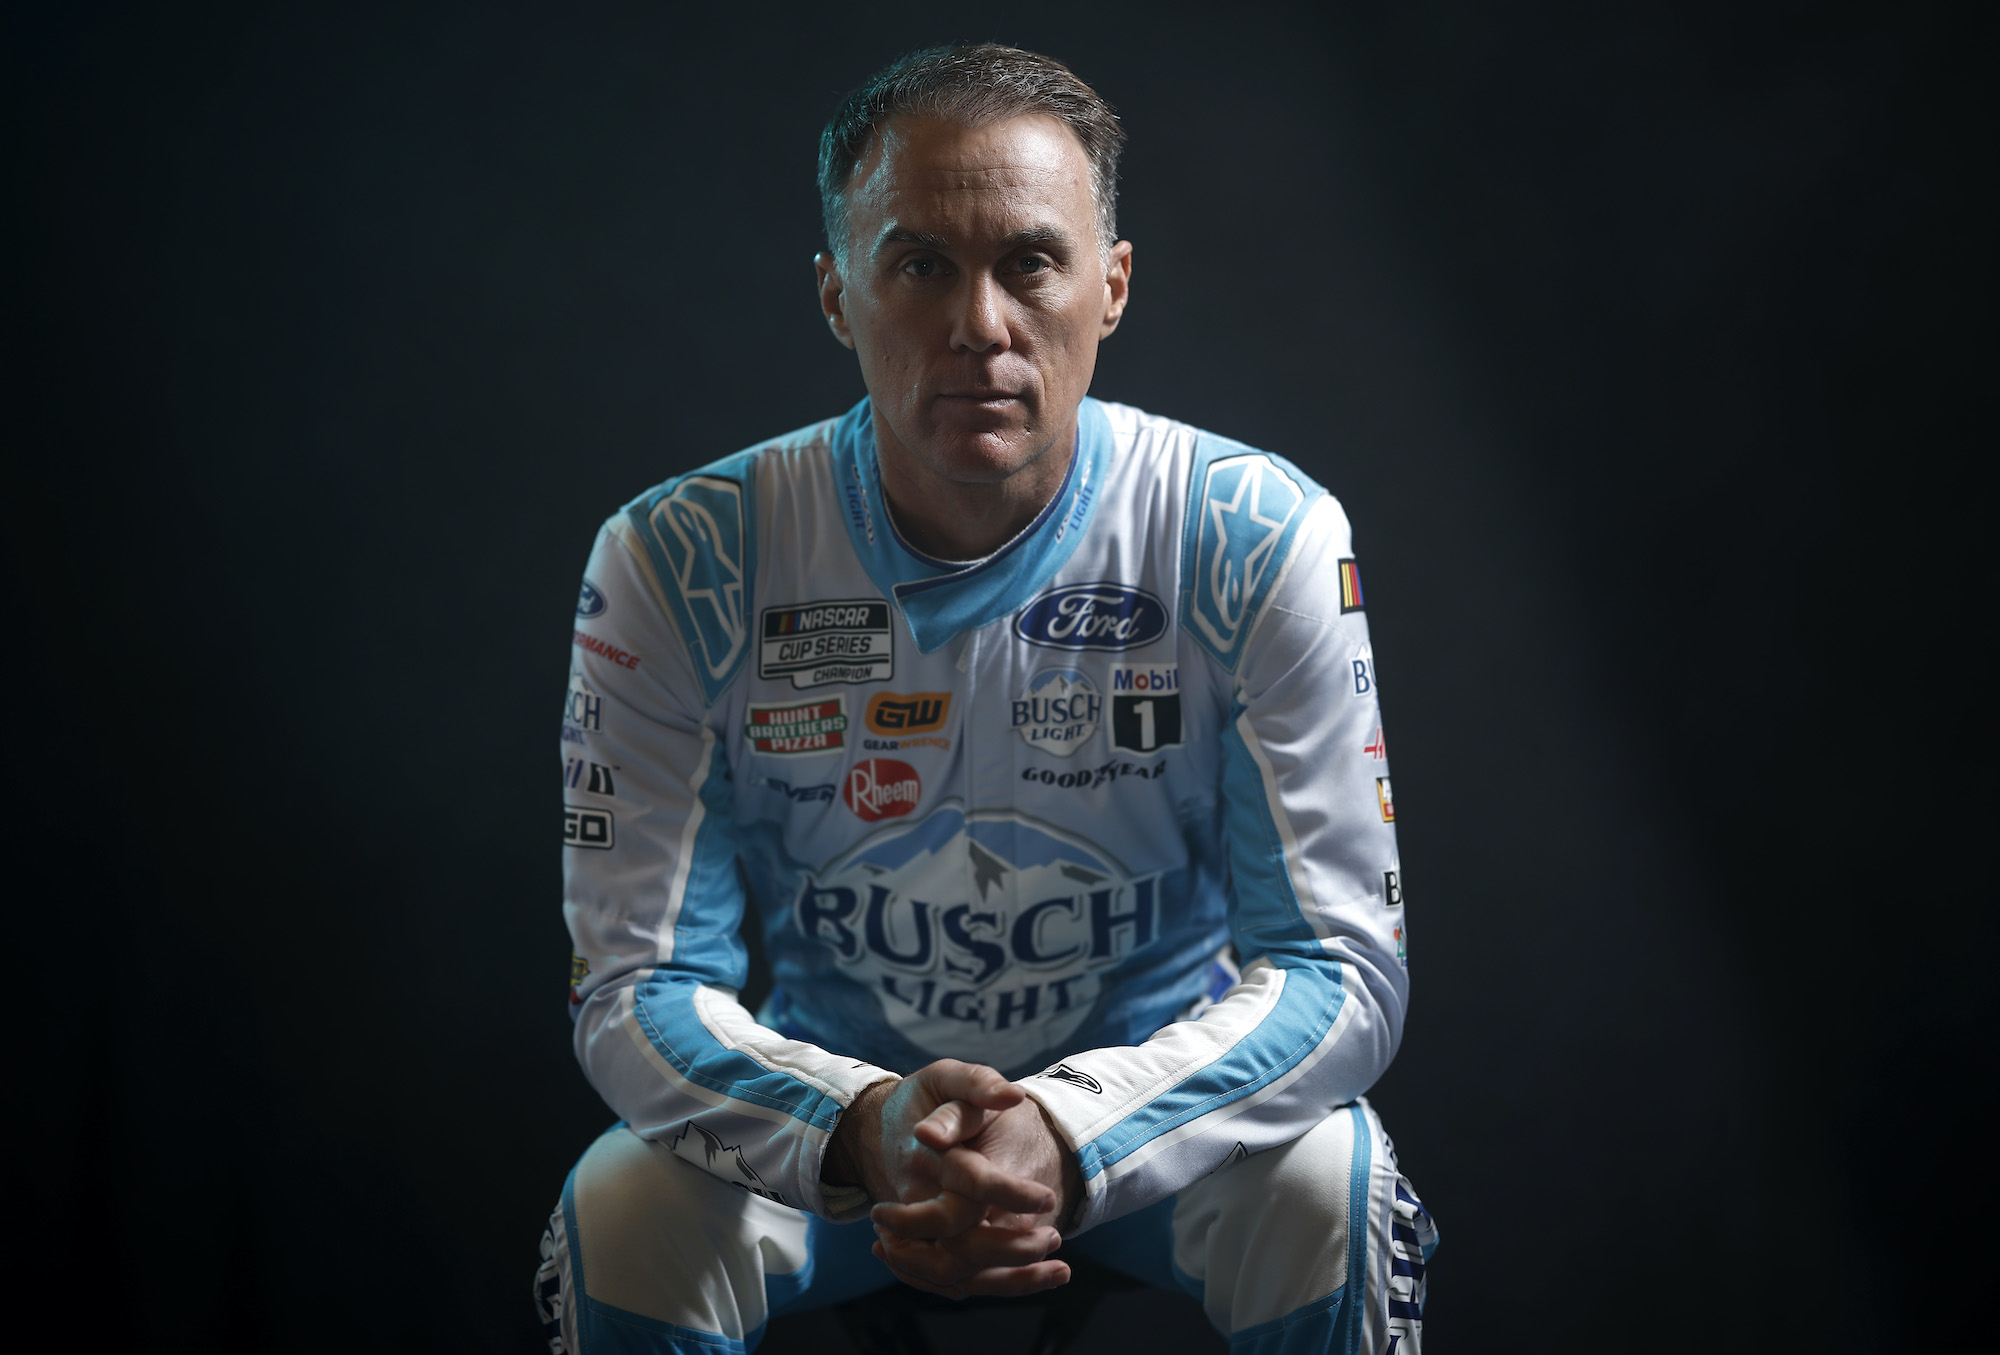 Kevin Harvick Reviews Career, Admits He Enjoyed Creating Chaos, but Regrets ‘Dumb’ Move He Made That Produced One of NASCAR’s Most Chaotic Moments